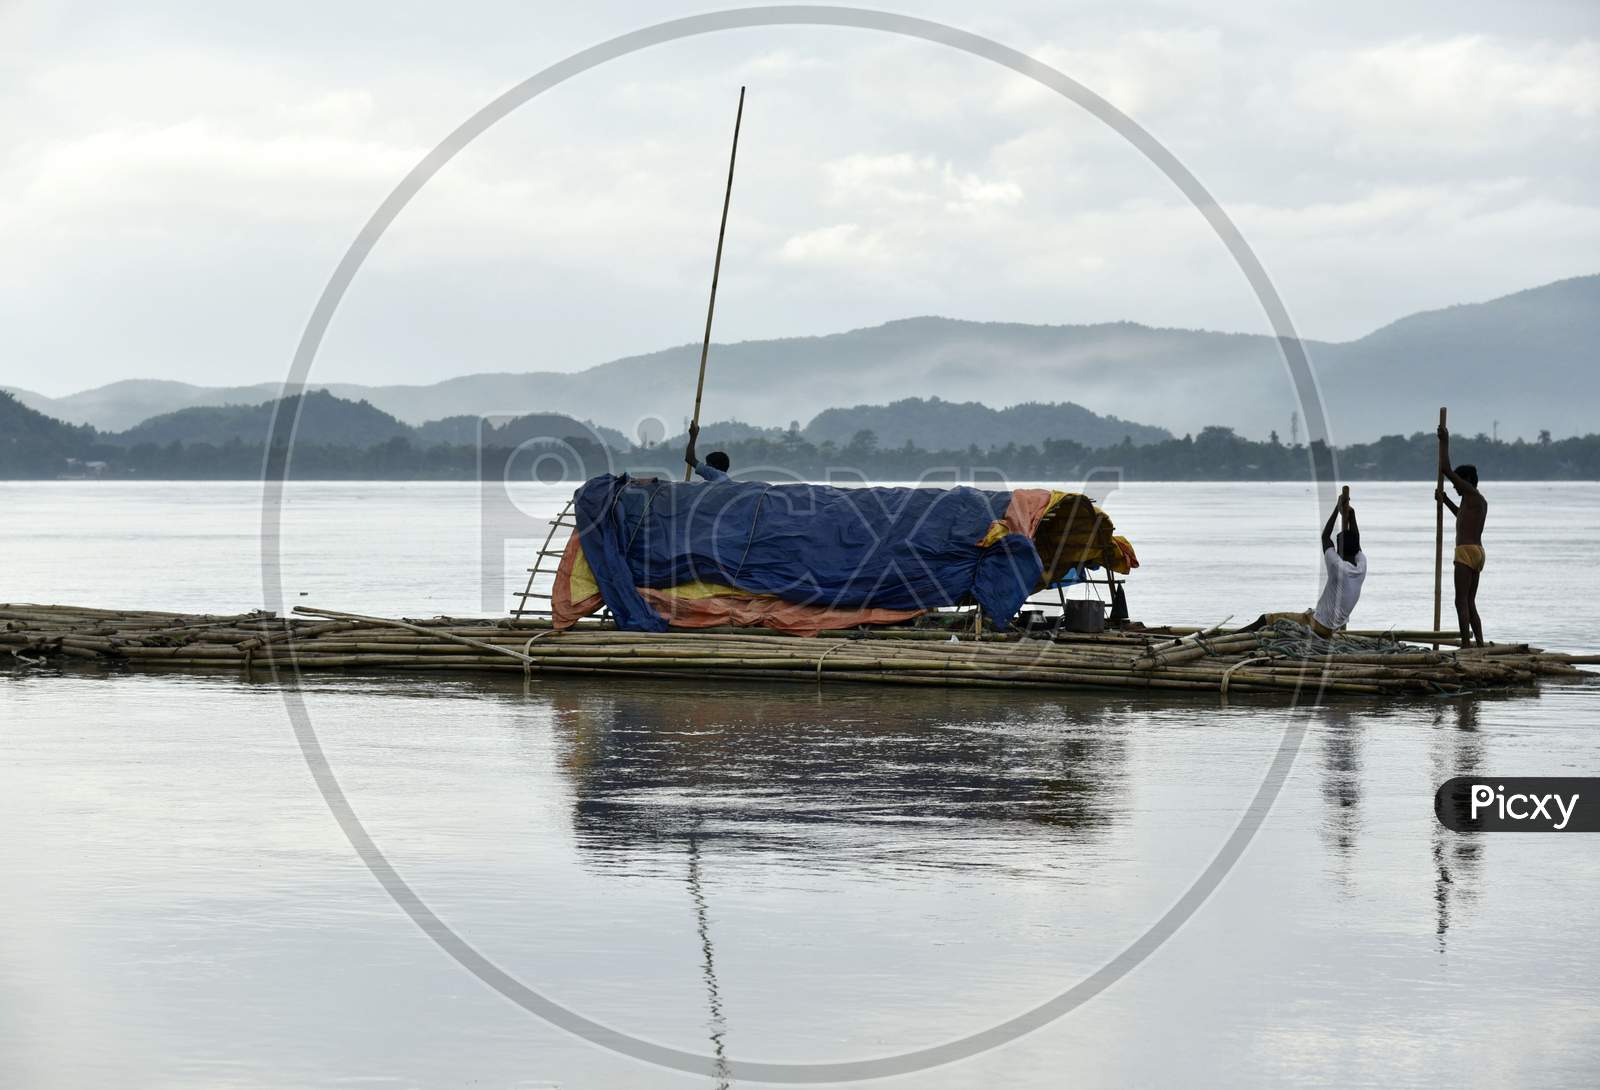 Vendors Steer A Bamboo Pontoon As It Is Transported Down The River Brahamaputra To Sell, In Guwahati, Assam, India On September 14, 2019.